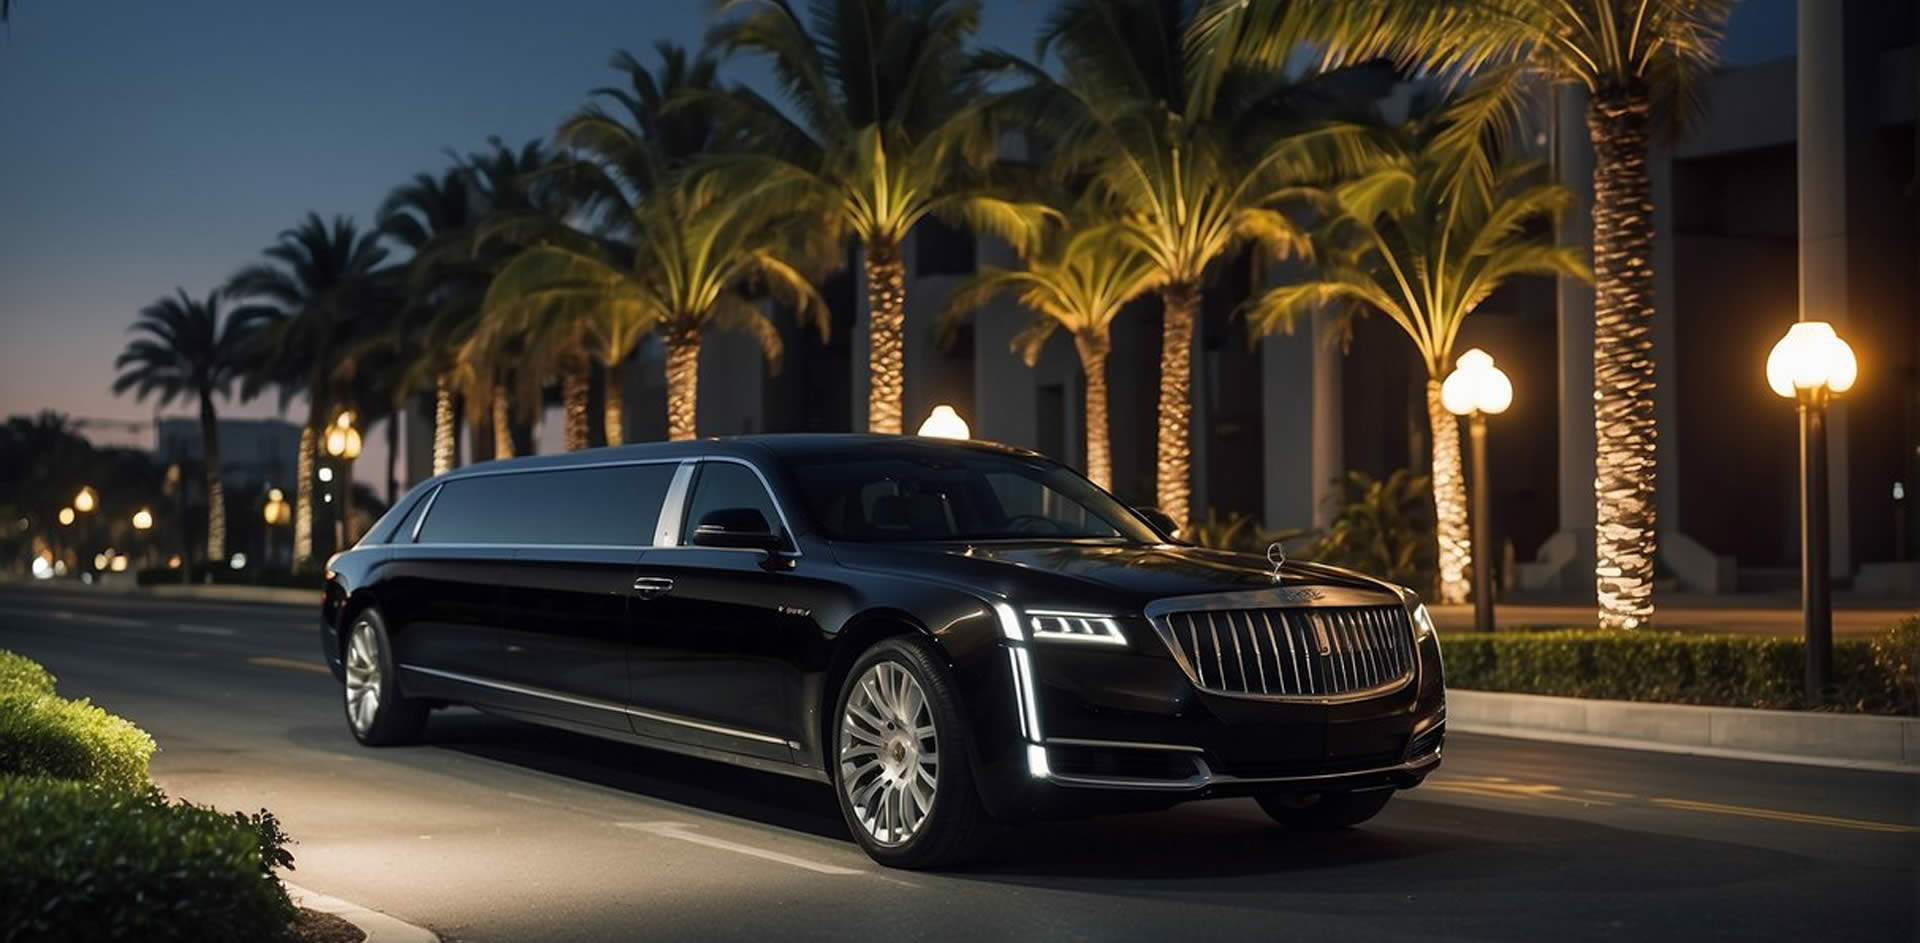 A sleek, black limousine pulls up to a grand airport entrance, surrounded by palm trees and glowing city lights. The luxurious vehicle exudes elegance and sophistication, promising a top-notch experience for its passengers